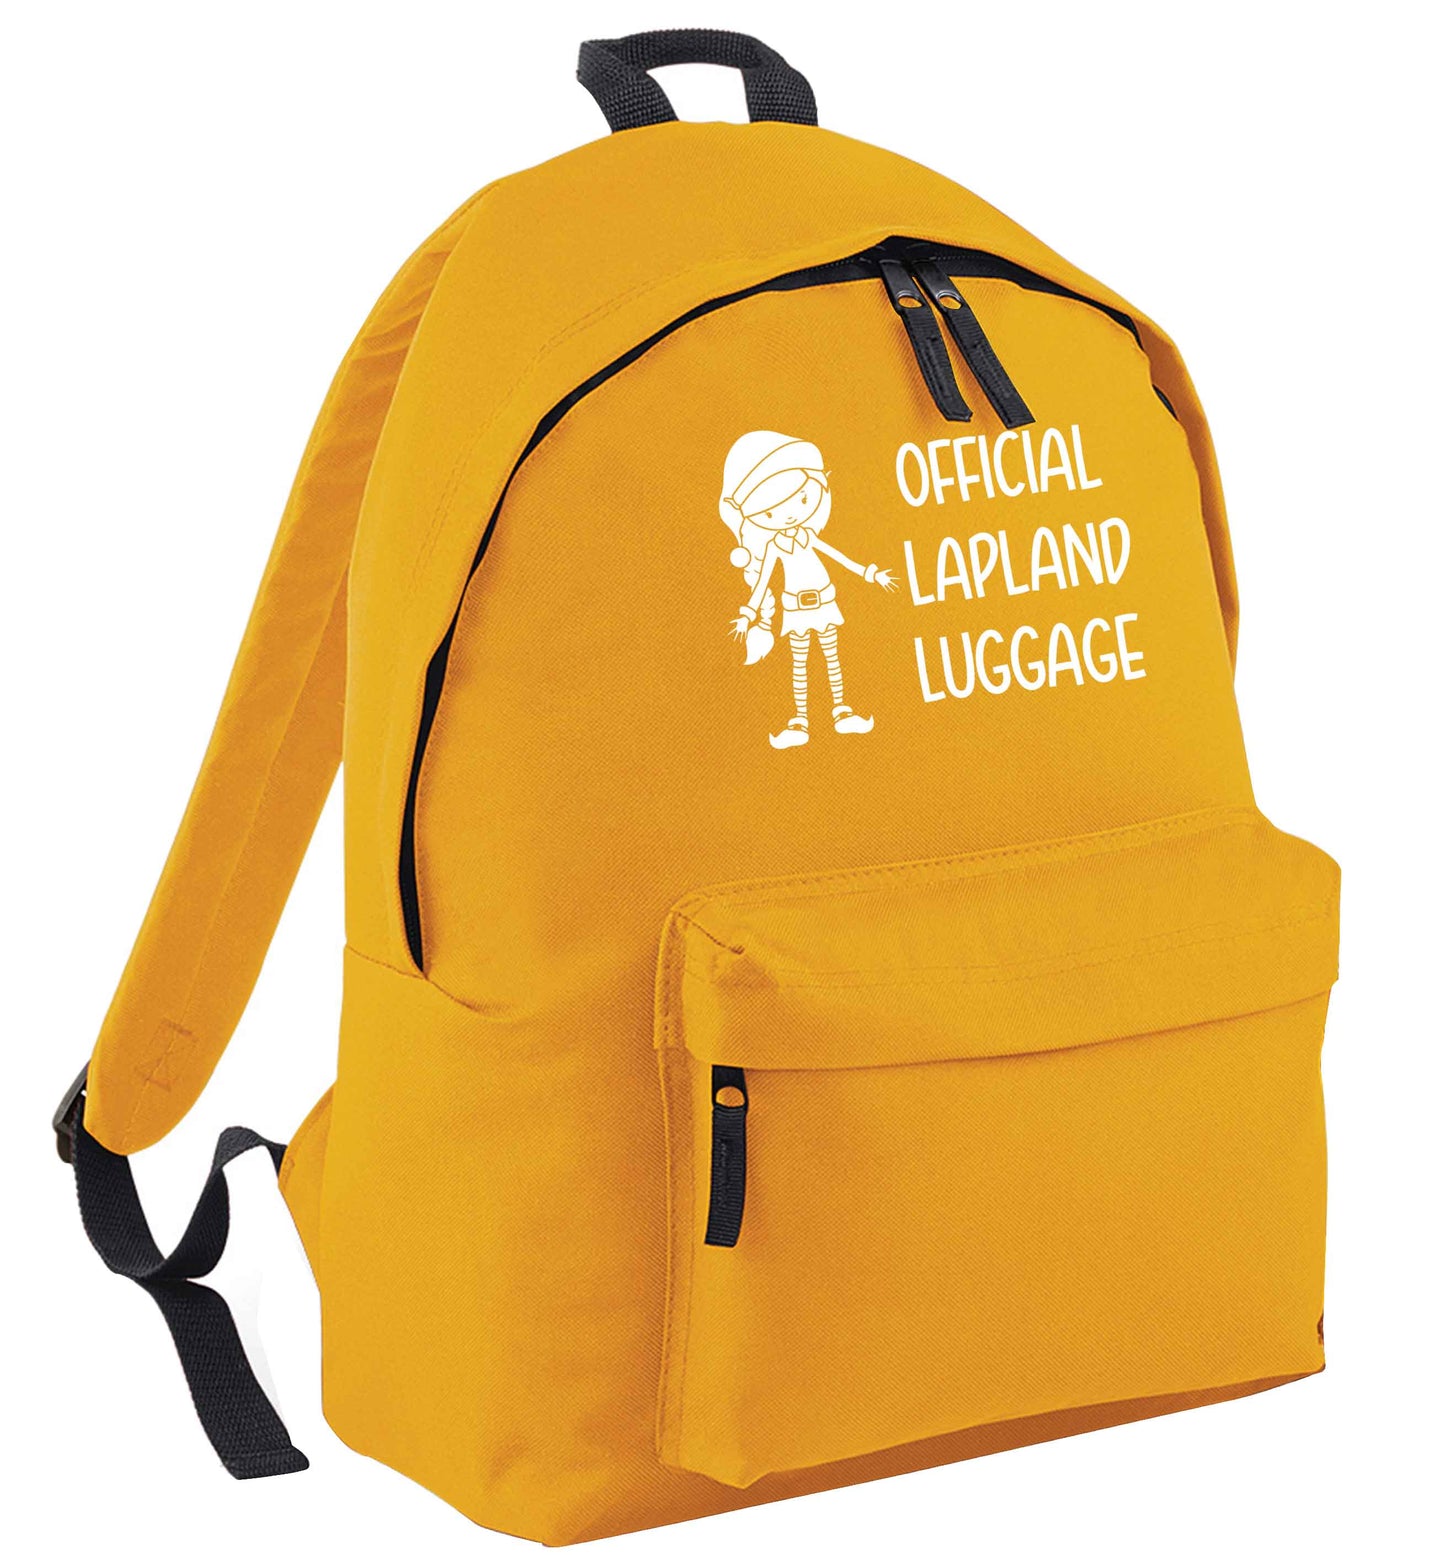 Official lapland luggage - Elf snowflake mustard adults backpack